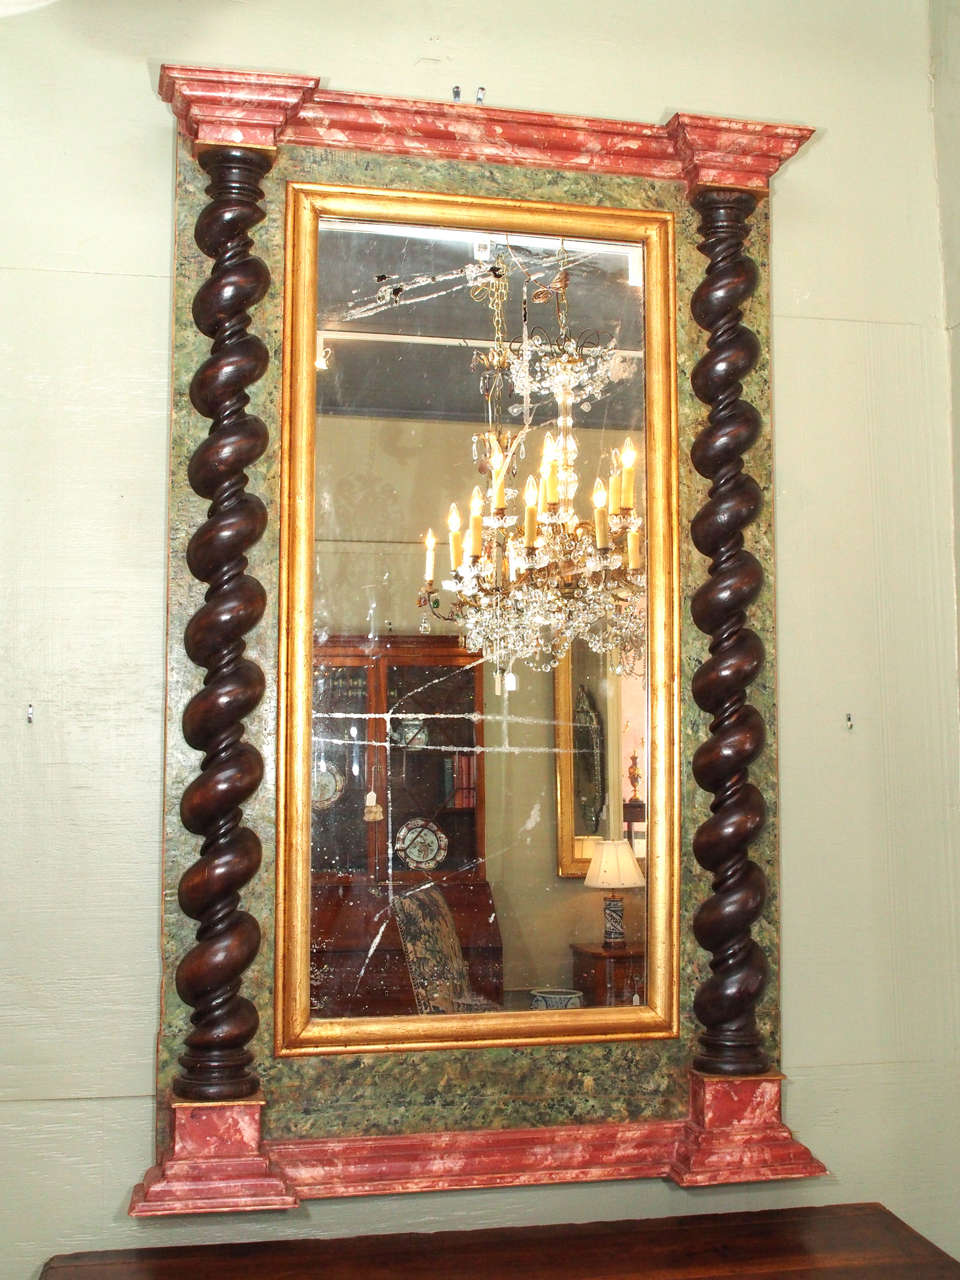 Antique Spanish walnut and "faux bois" mirror